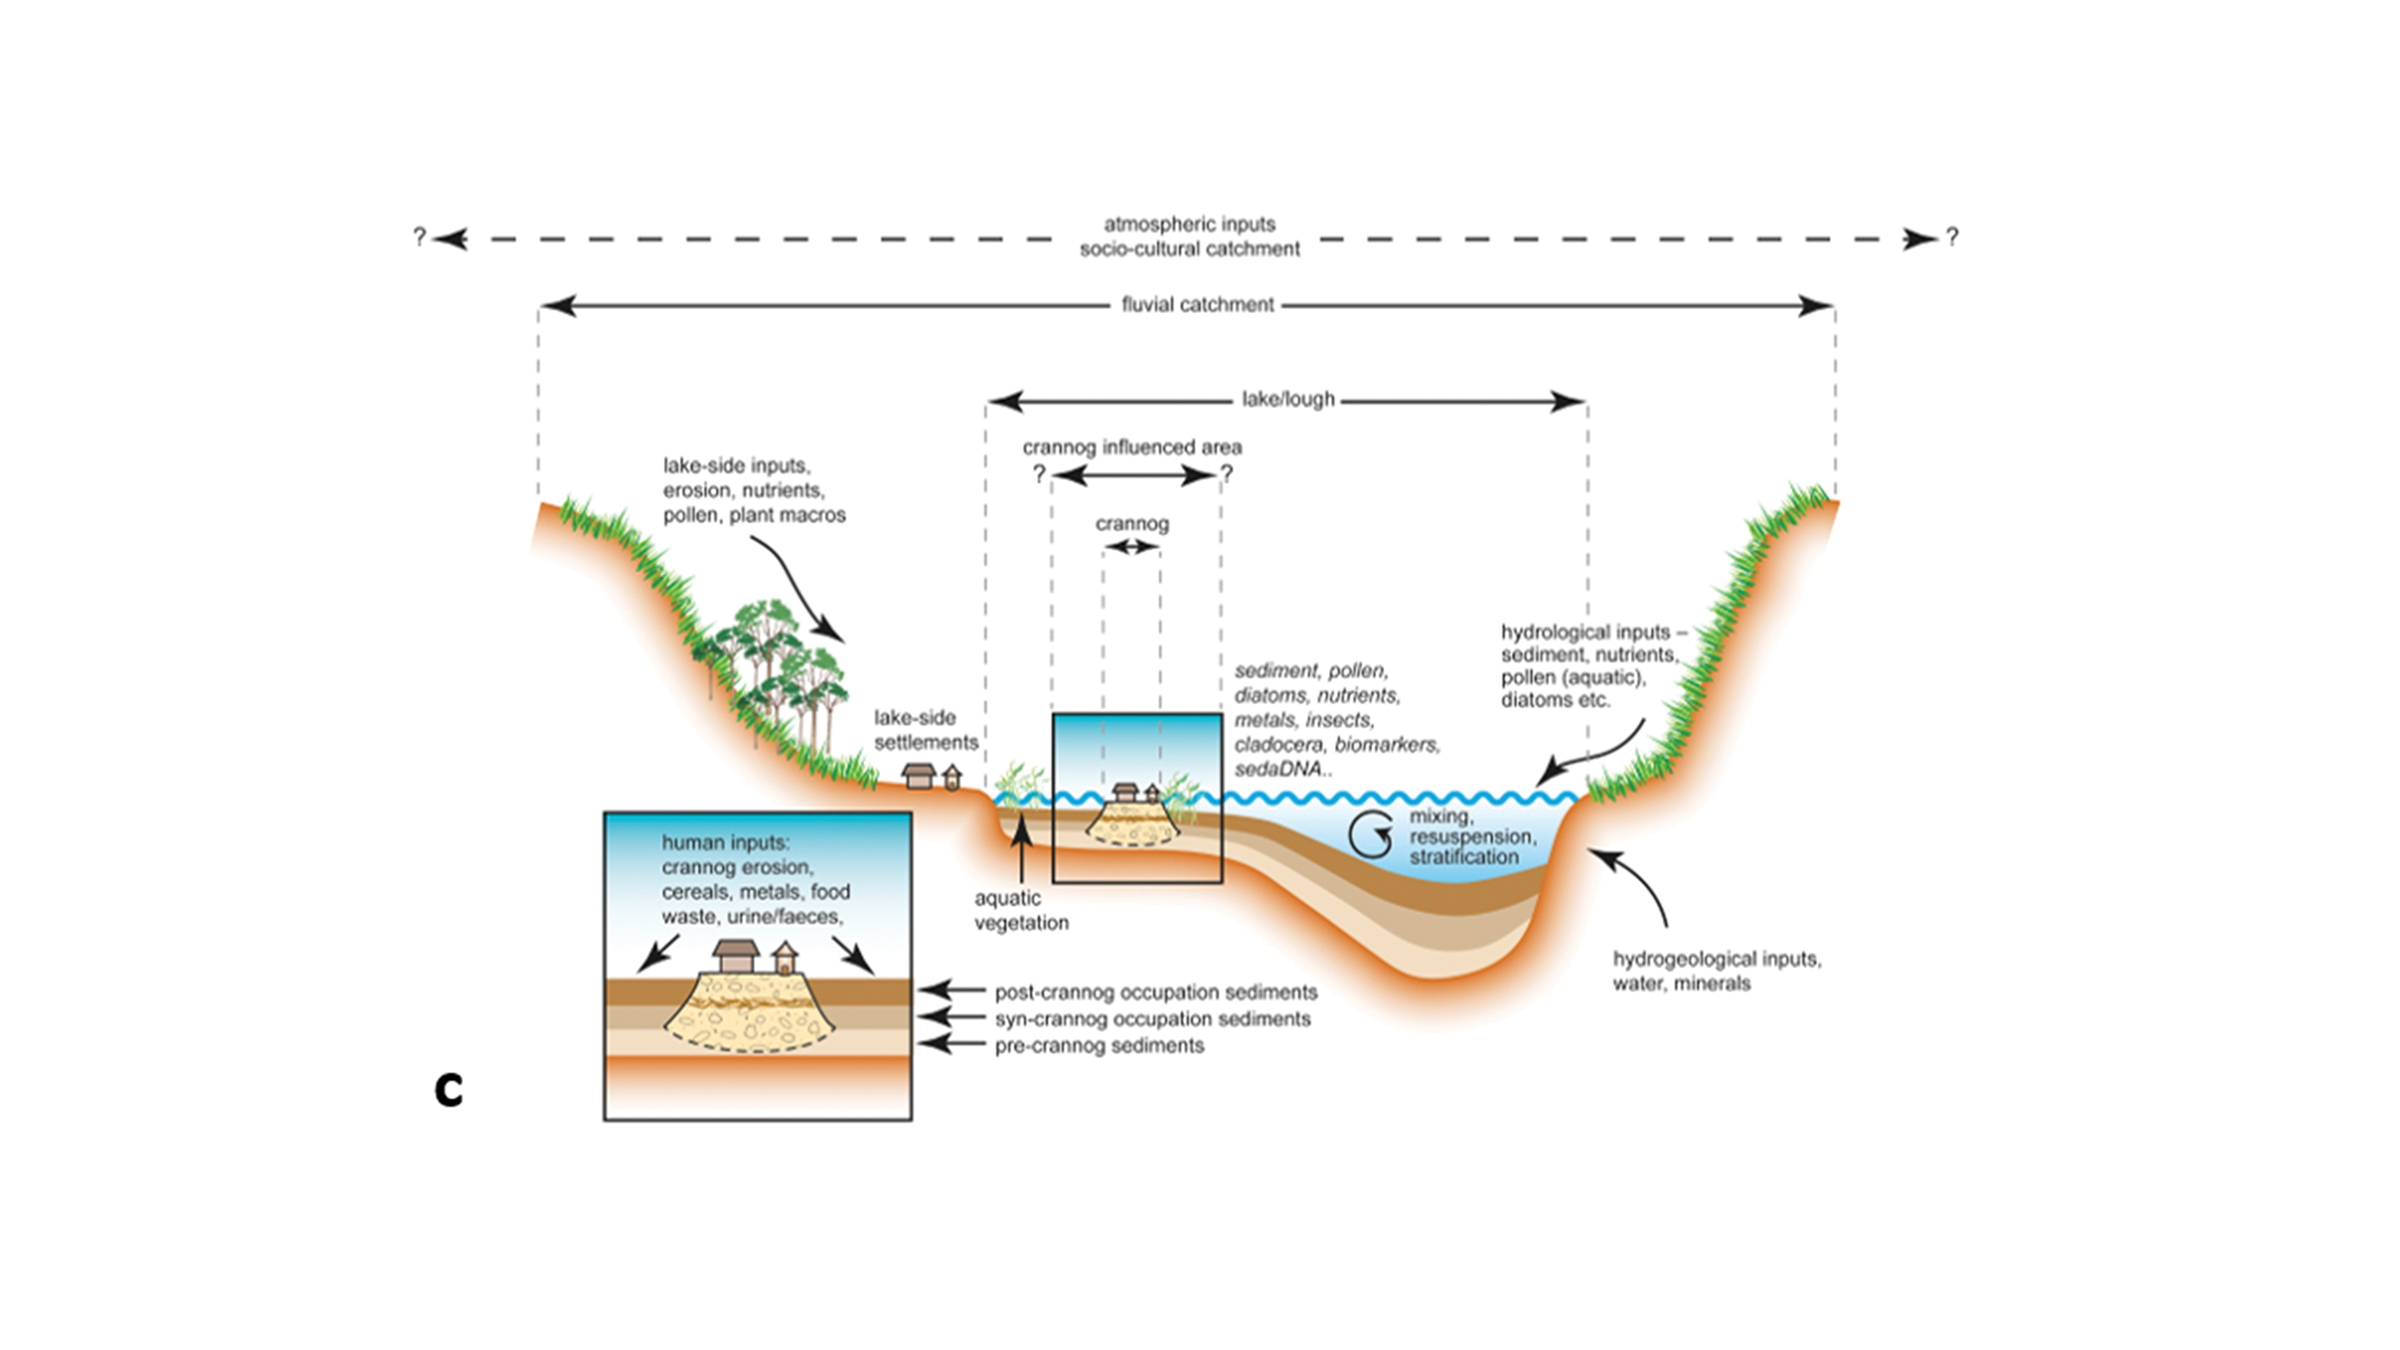 A layered model of a lake crannog and the nearby sediments.